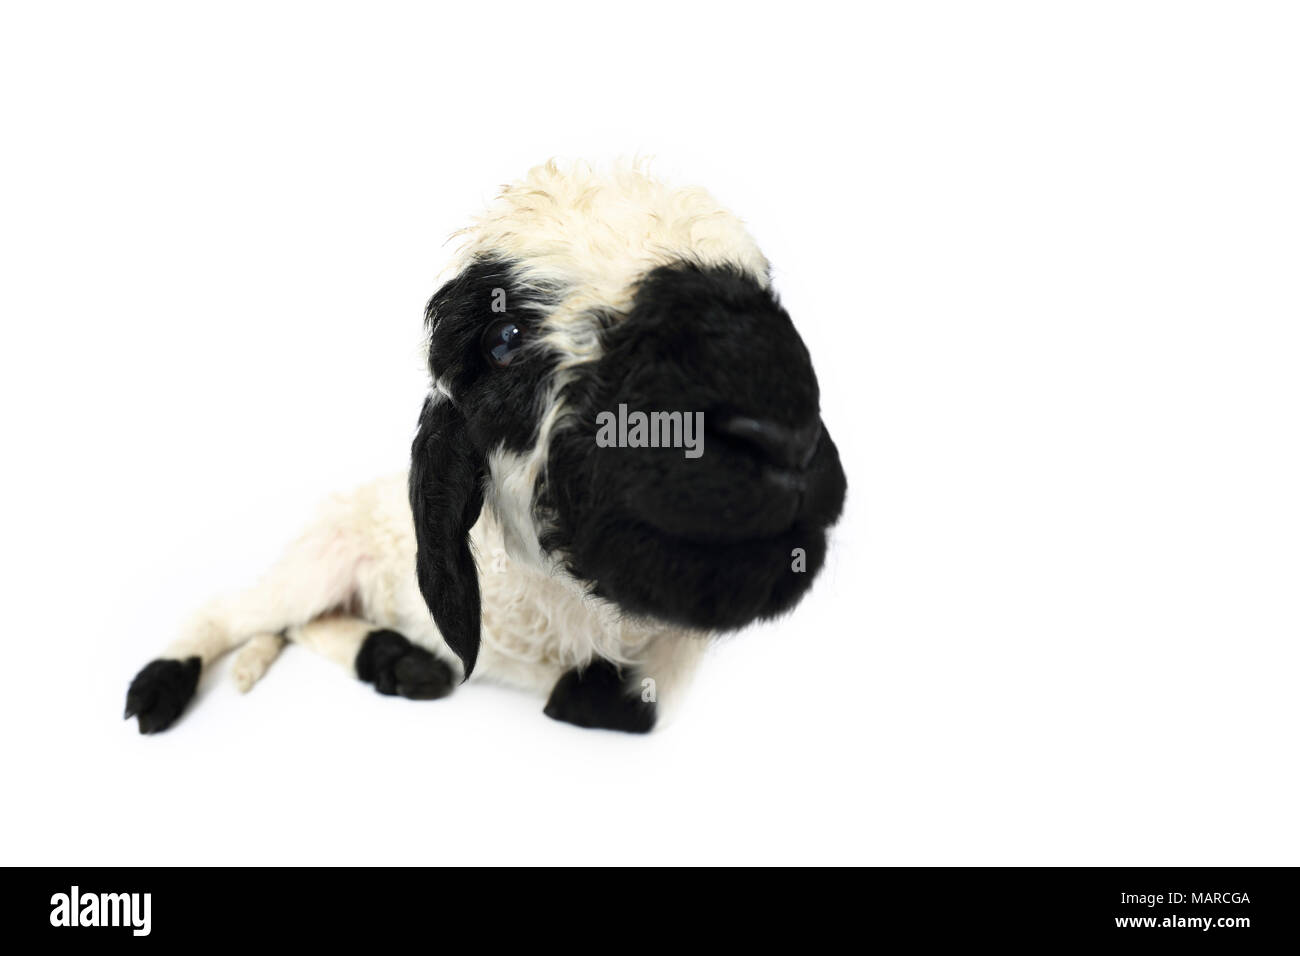 Valais Blacknose Sheep. Lamb (5 days old) lying. Studio picture against a white background. Germany Stock Photo